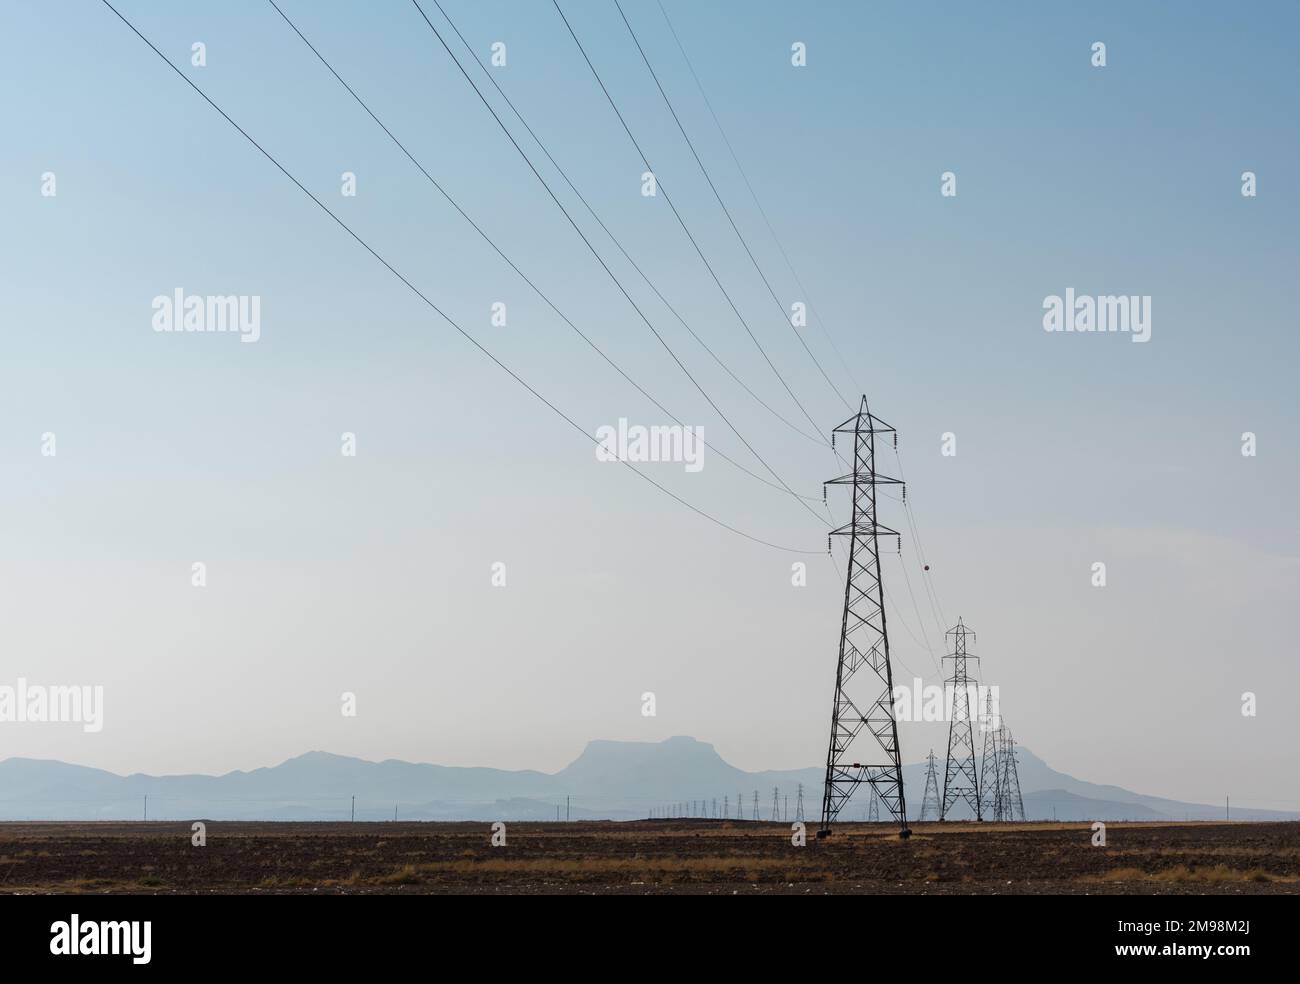 Electricity pylons in the desert Stock Photo